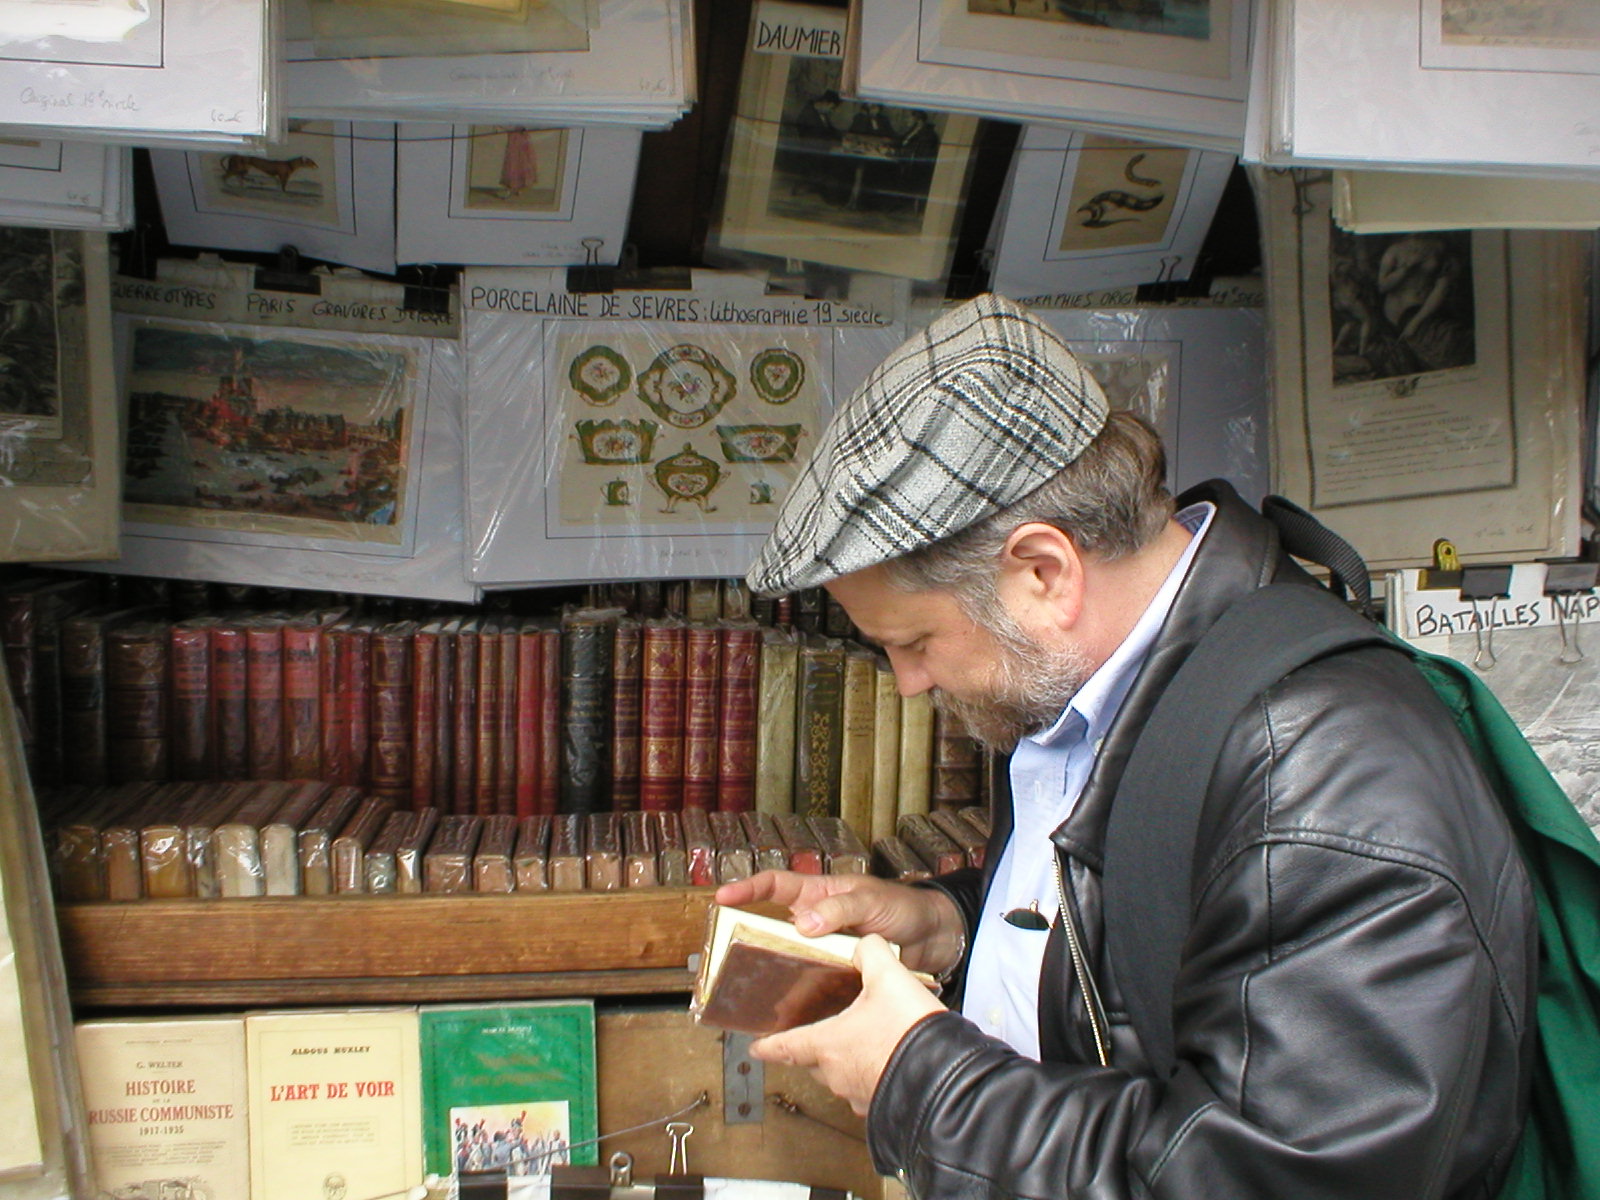 A blind flaneur peruses an edition of Voltaire printed in 1745.